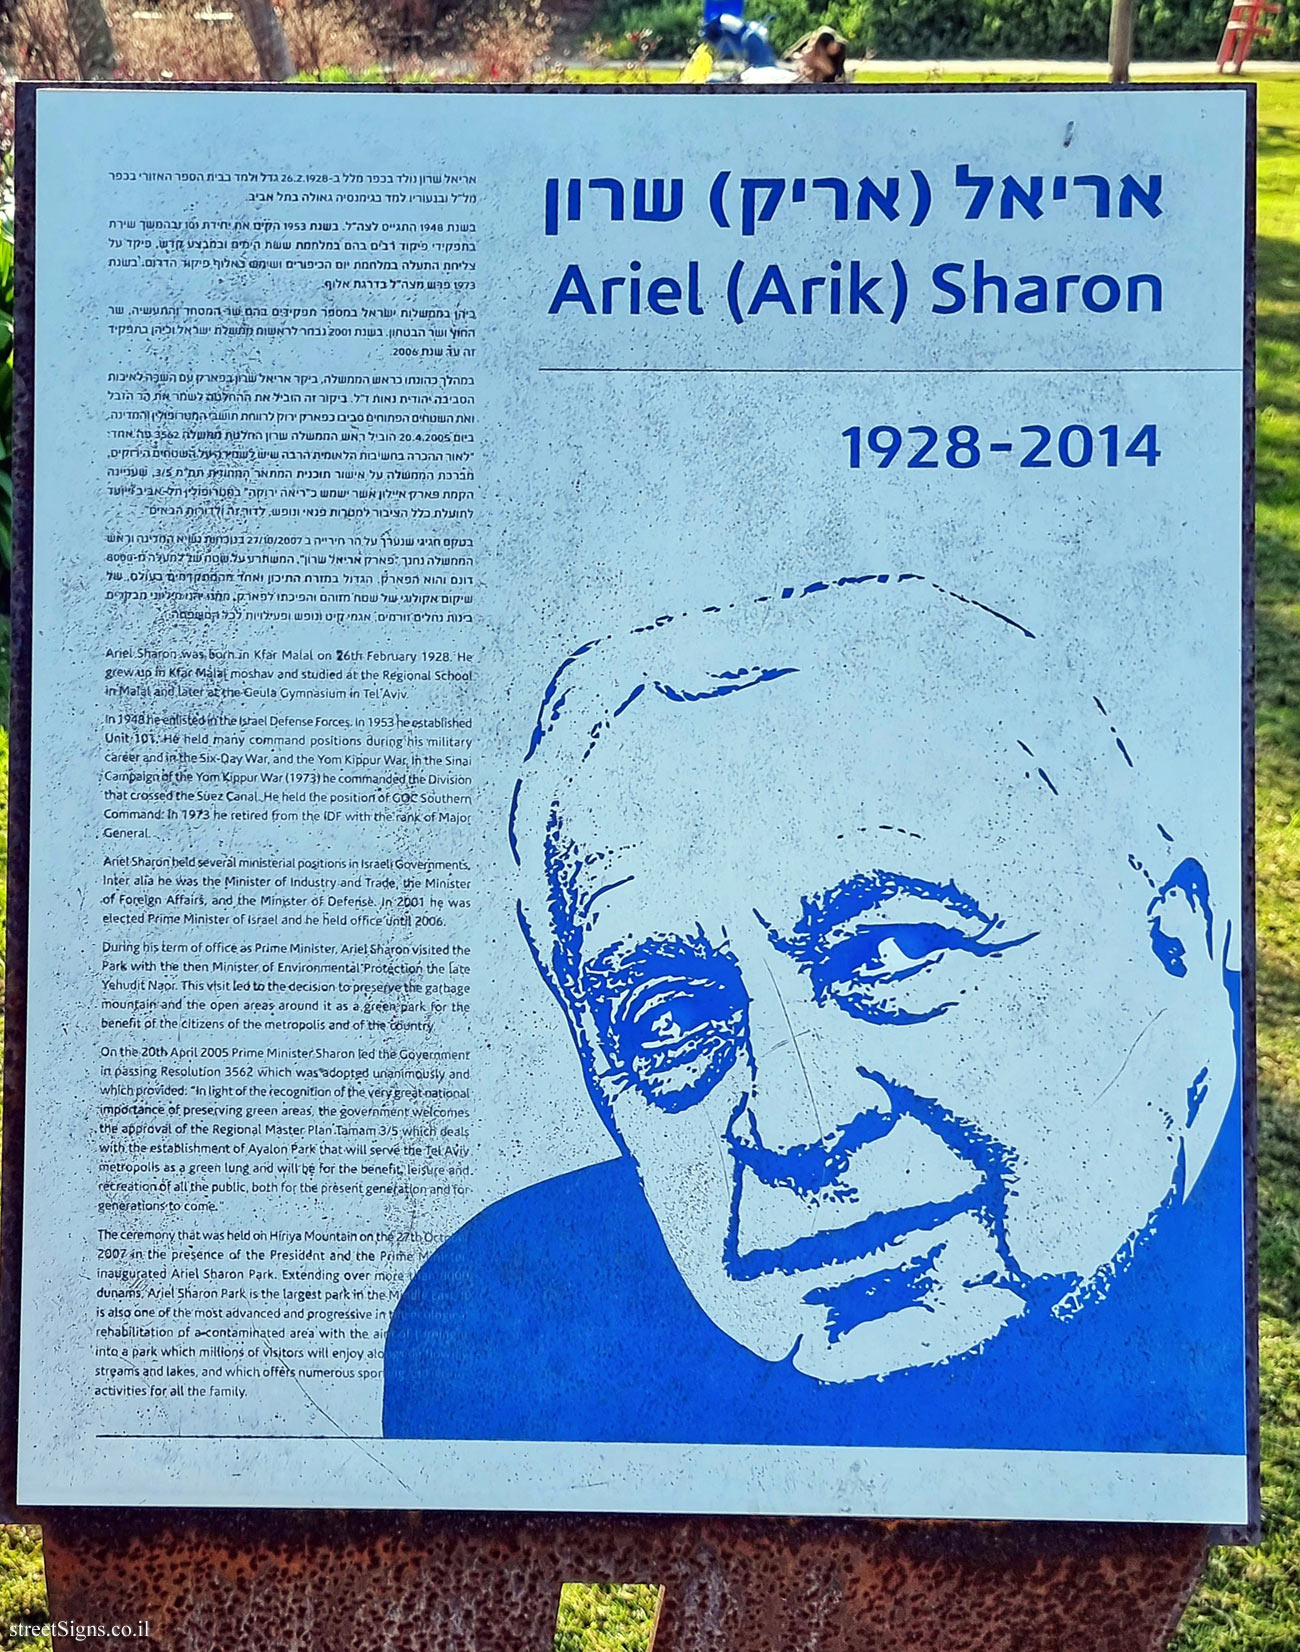 Ariel Sharon Park - Ariel Sharon and the inauguration of the park